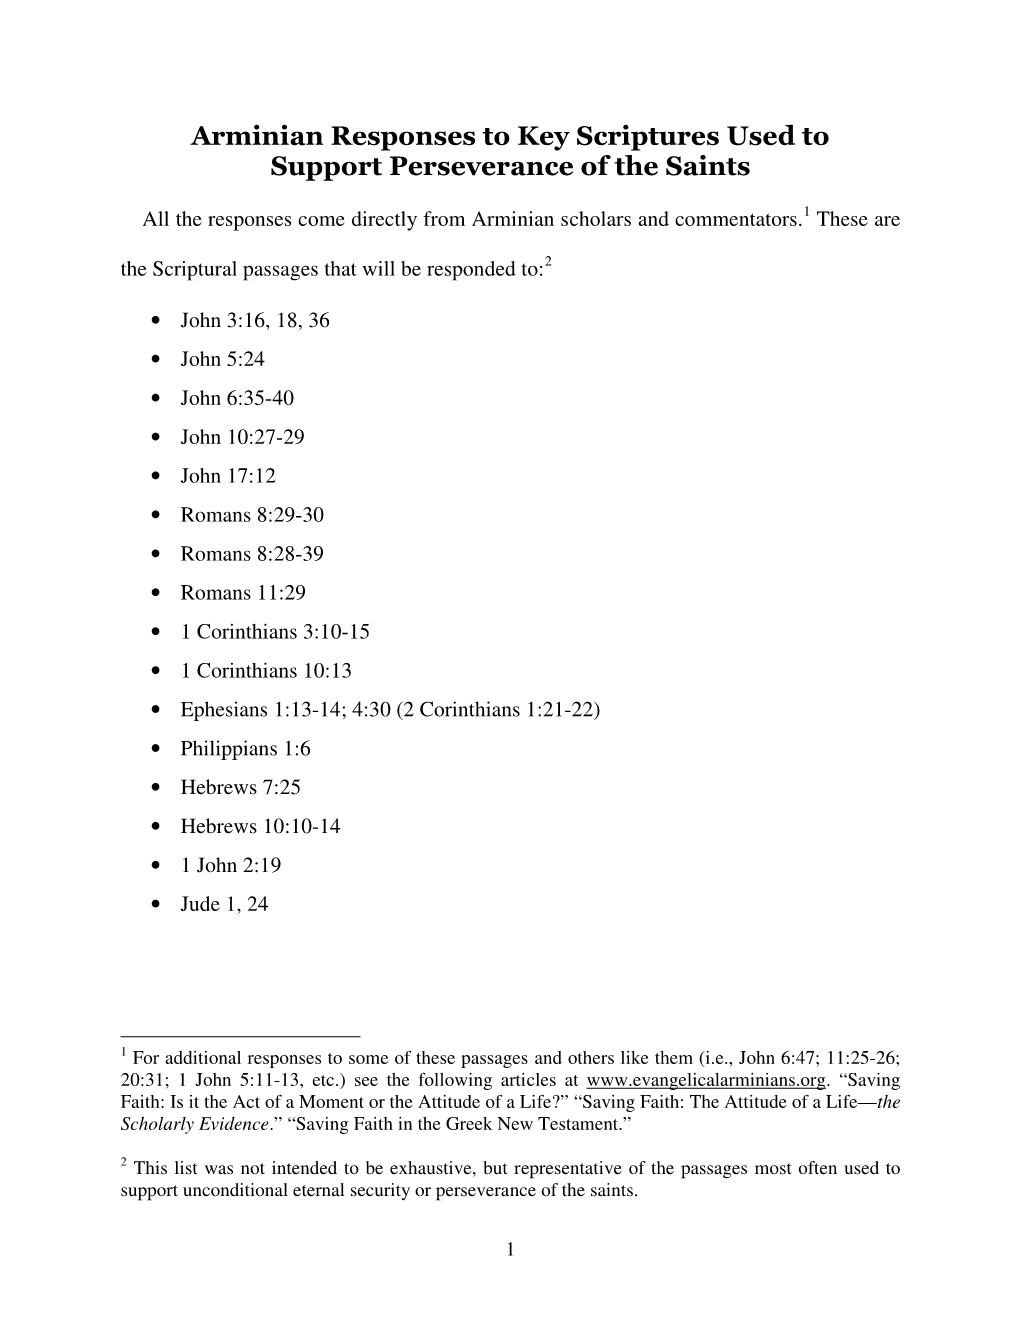 Arminian Responses to Key Scriptures Used to Support Perseverance of the Saints